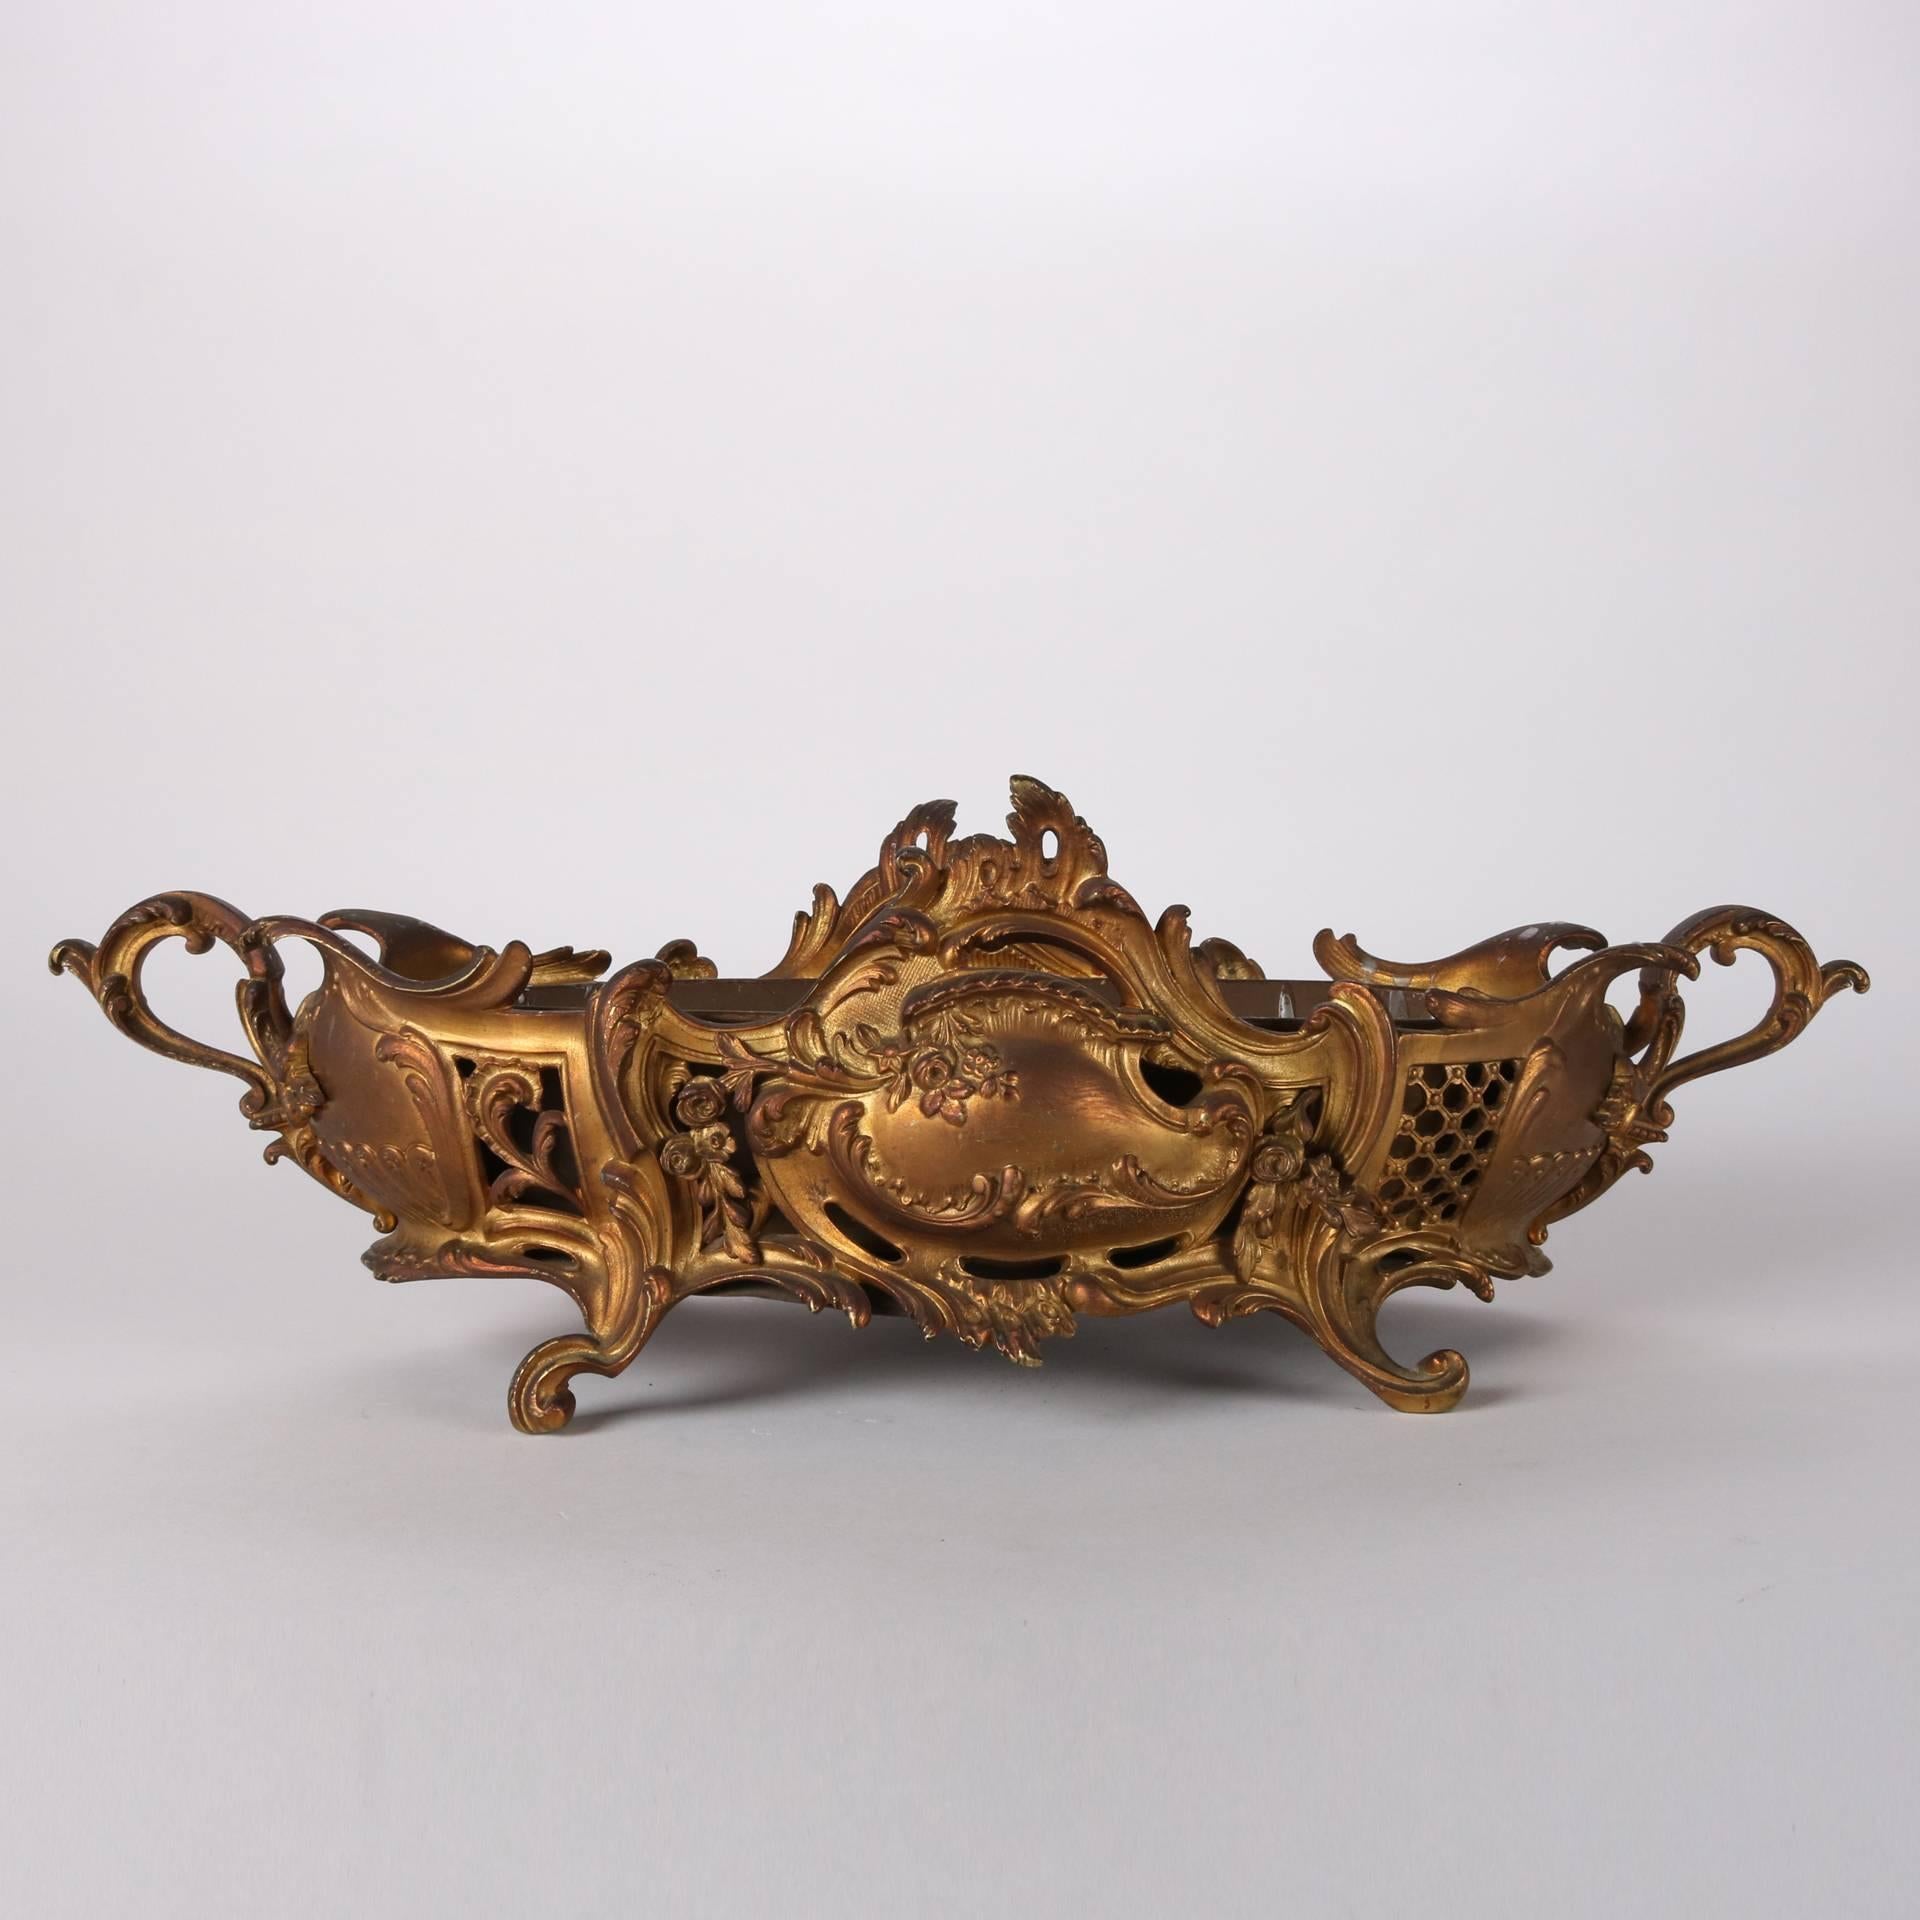 Antique French Rococo double handled console bowl feature pierced gilt bronze frame with scroll, floral and foliate decoration, solid insert, seated on four scrolled feet, 19th century

Measures: 6